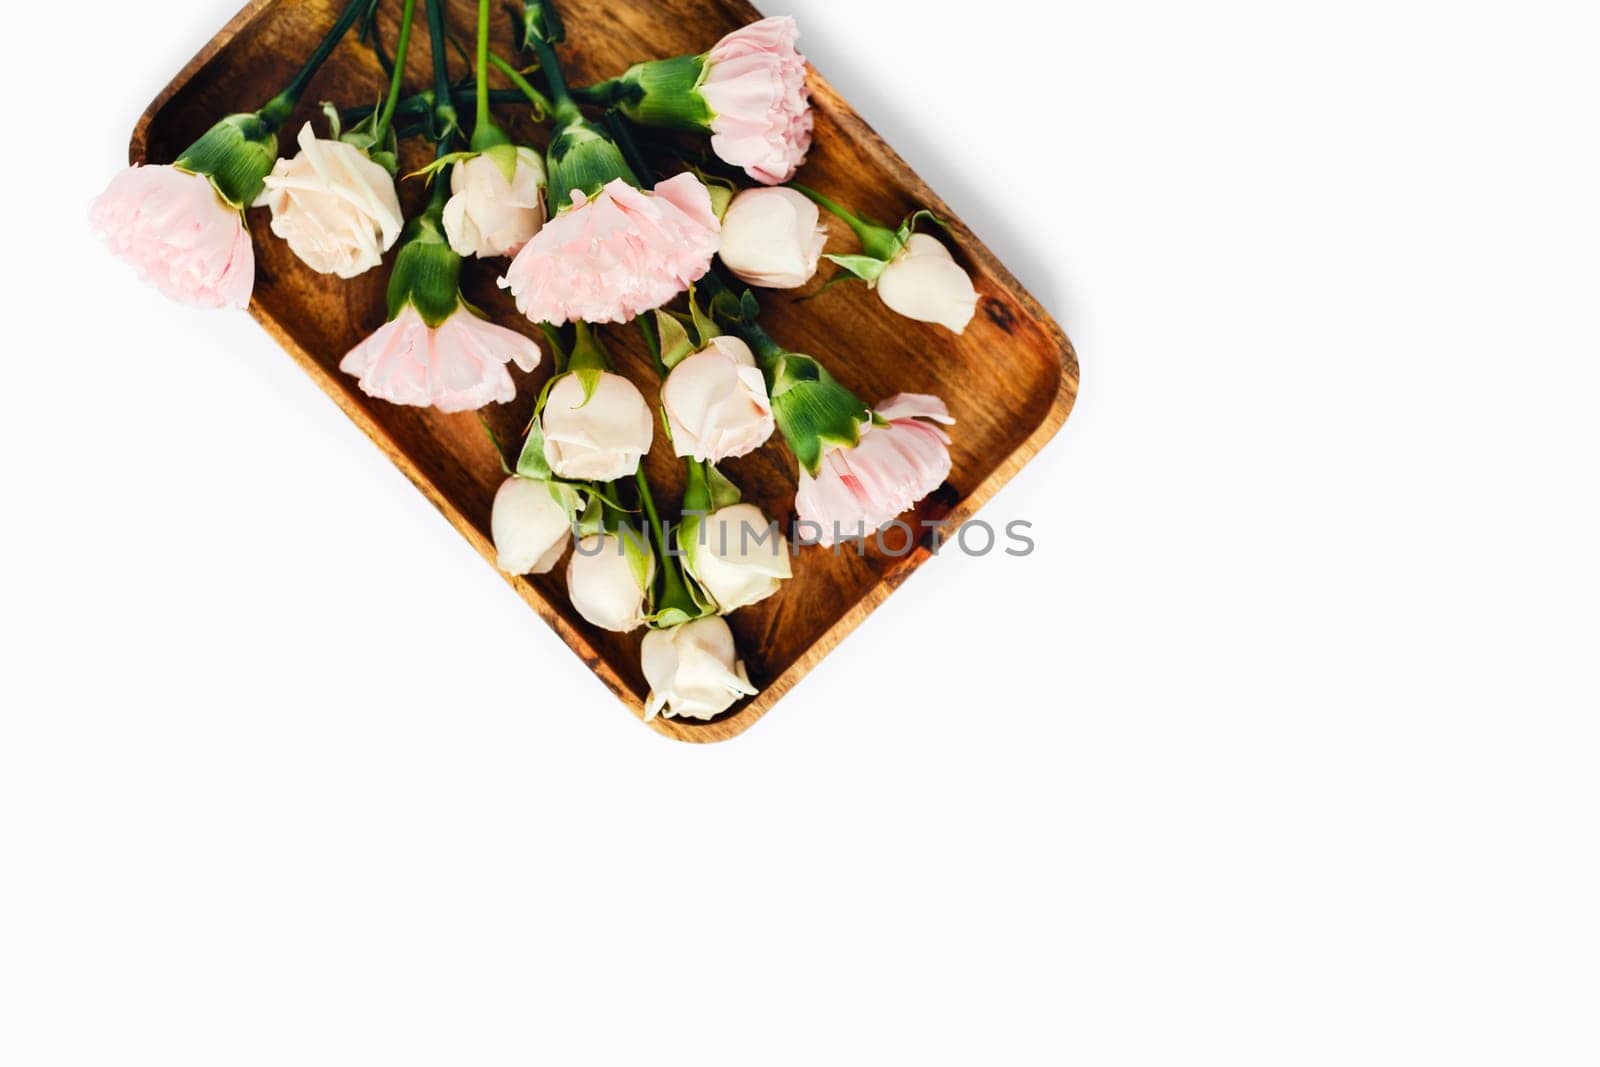 White and pink roses on a wooden tray on a white isolated background.